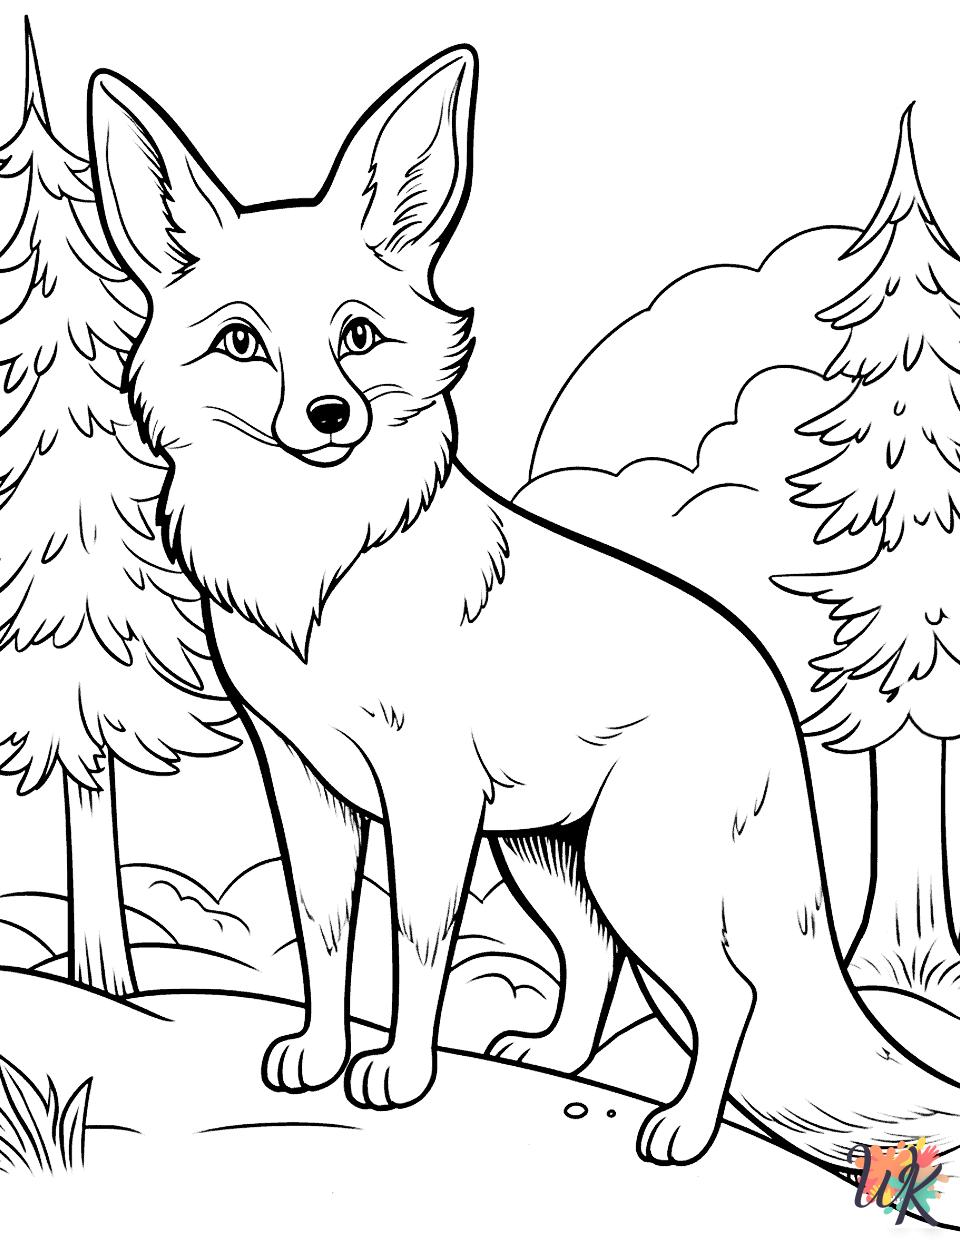 Arctic Animals coloring book pages